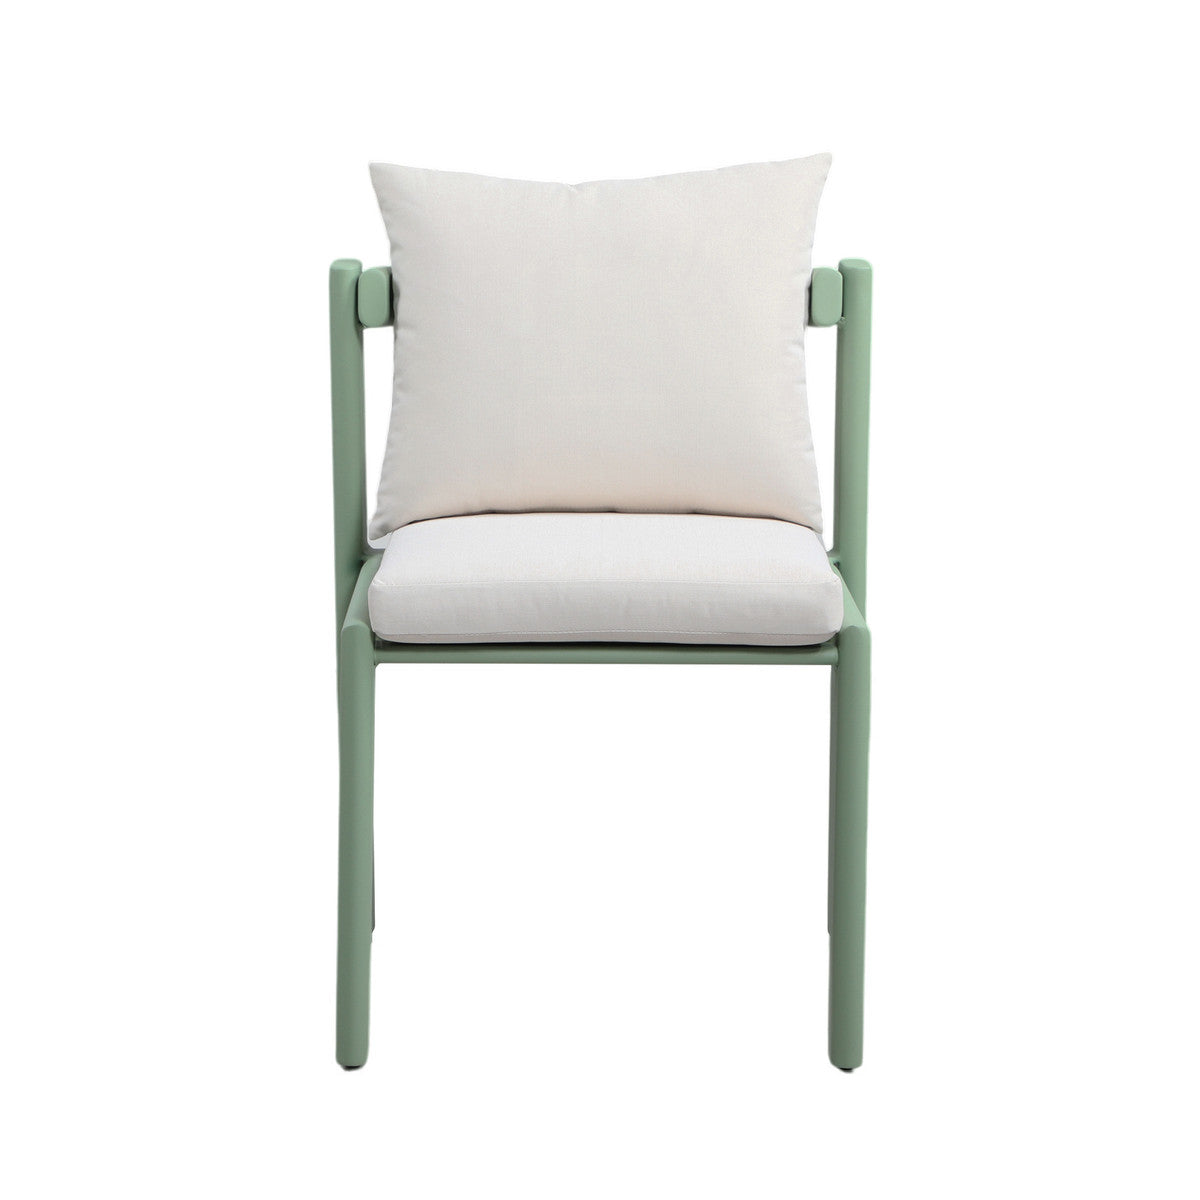 Anar Mint Green and Cream Outdoor Dining Chair